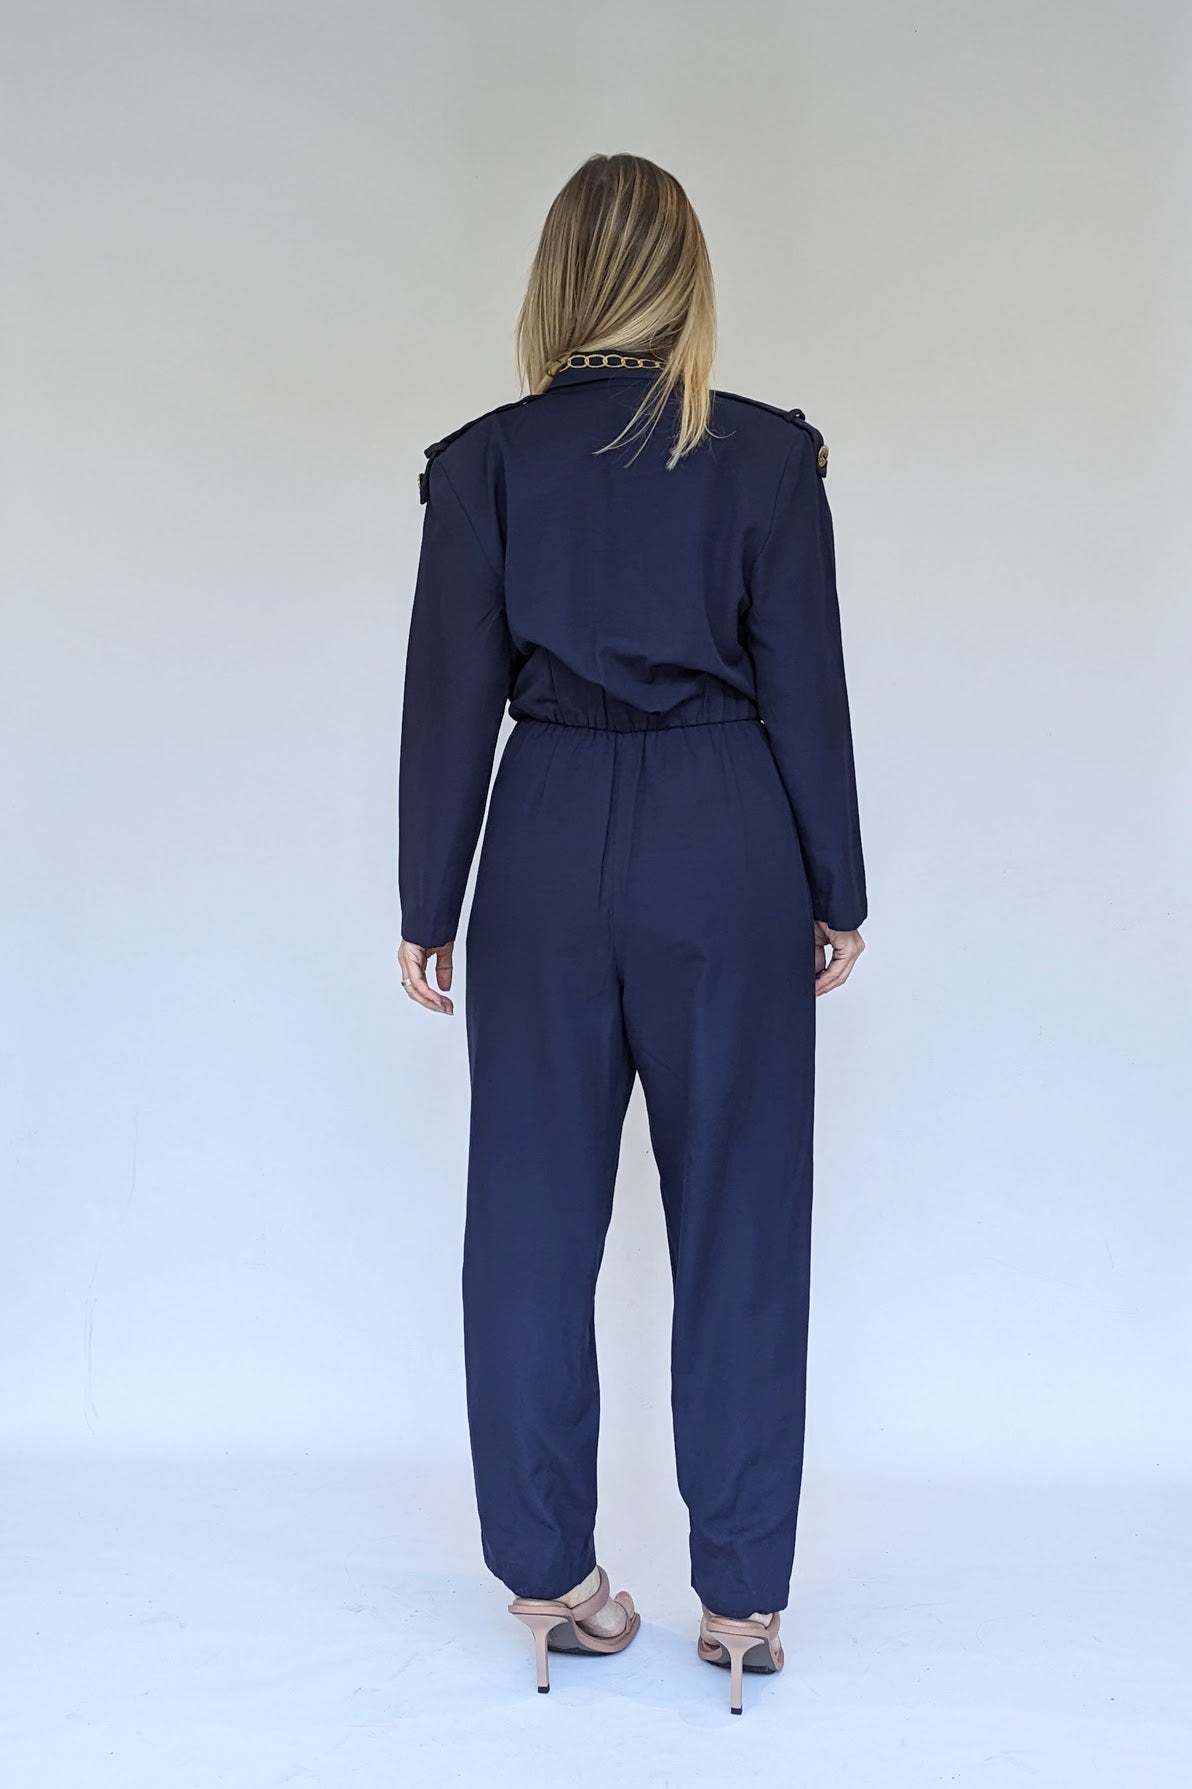 Navy and gold 80s jumpsuit